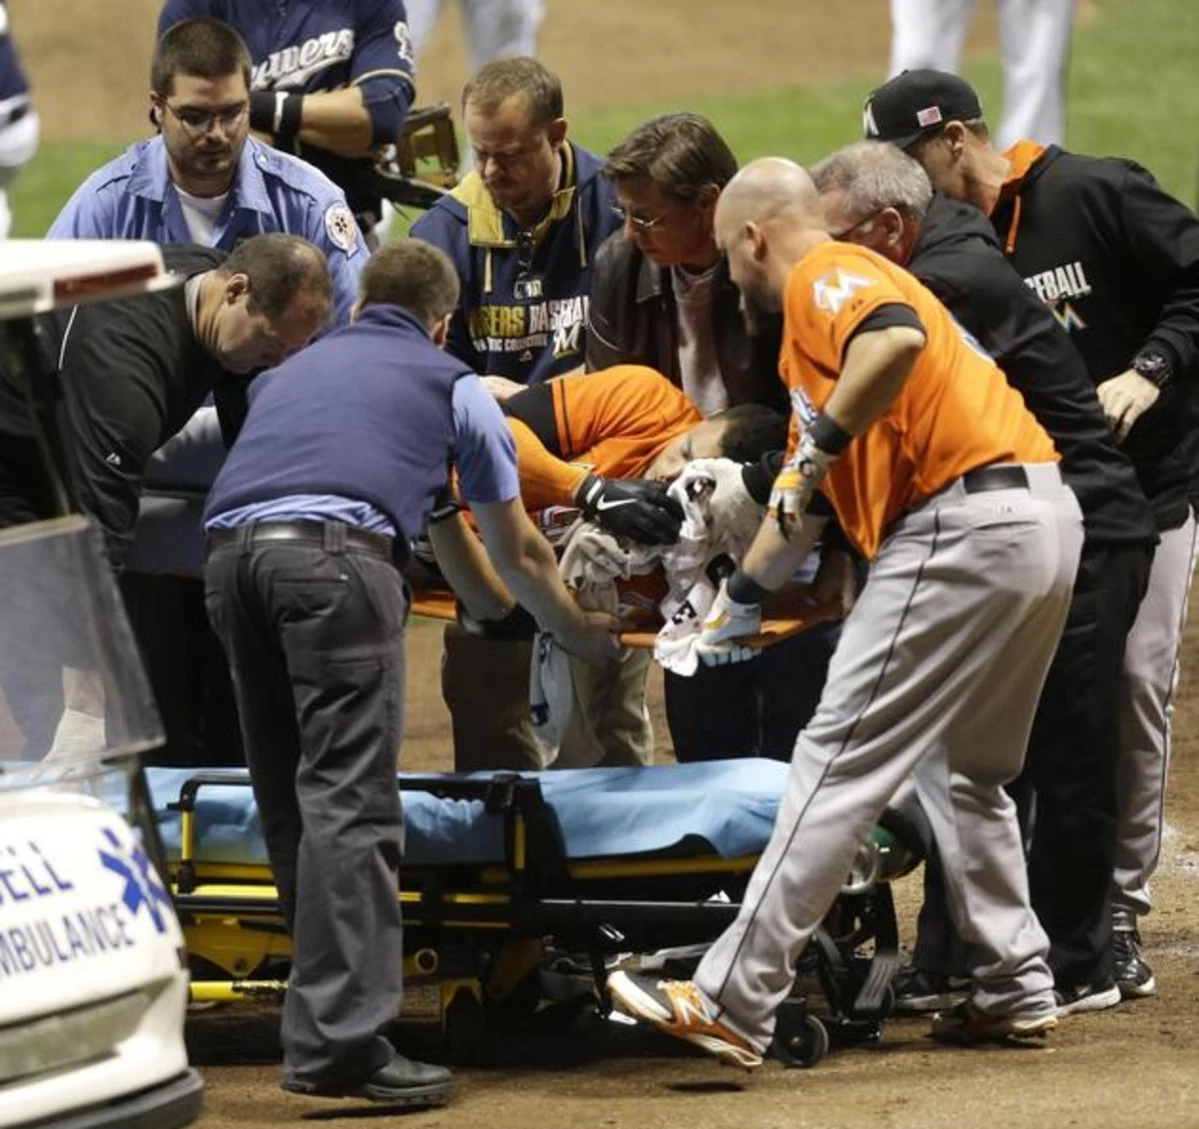 Hit by Pitch, the Miami Marlins' Giancarlo Stanton Is Taken to Hospital -  The New York Times